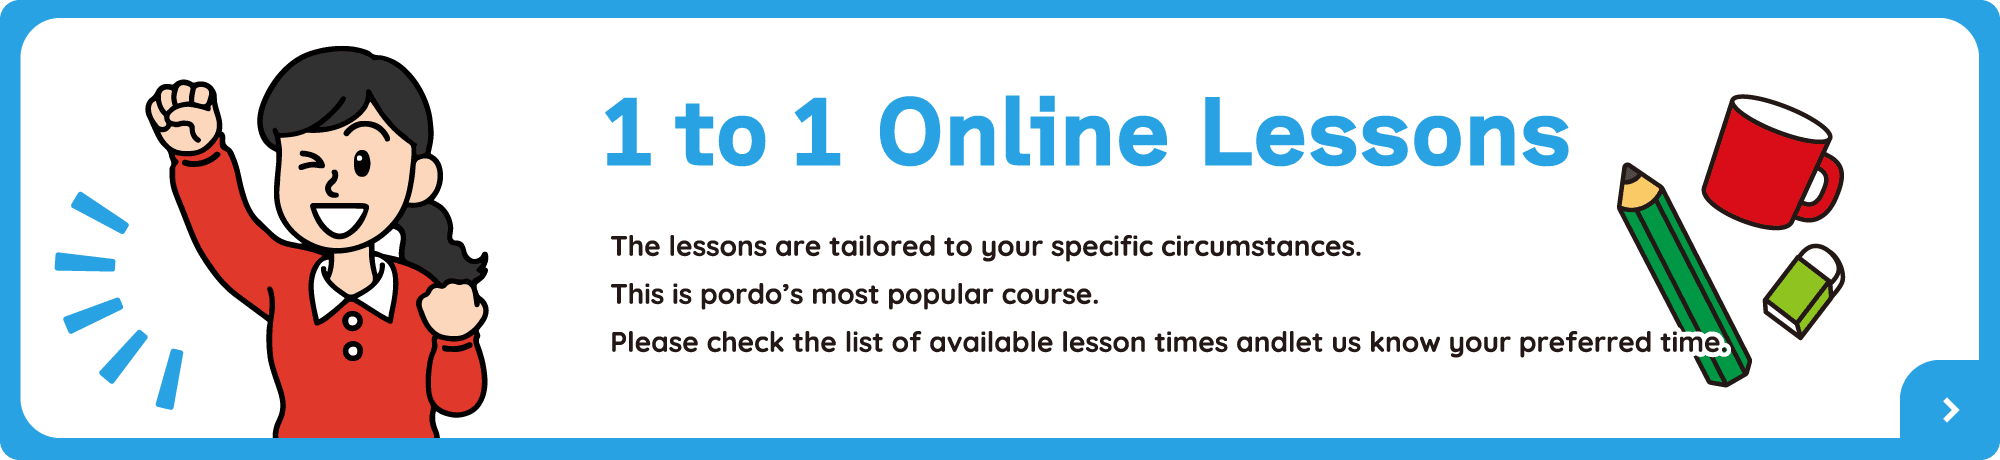 1 to 1 Online Lessons